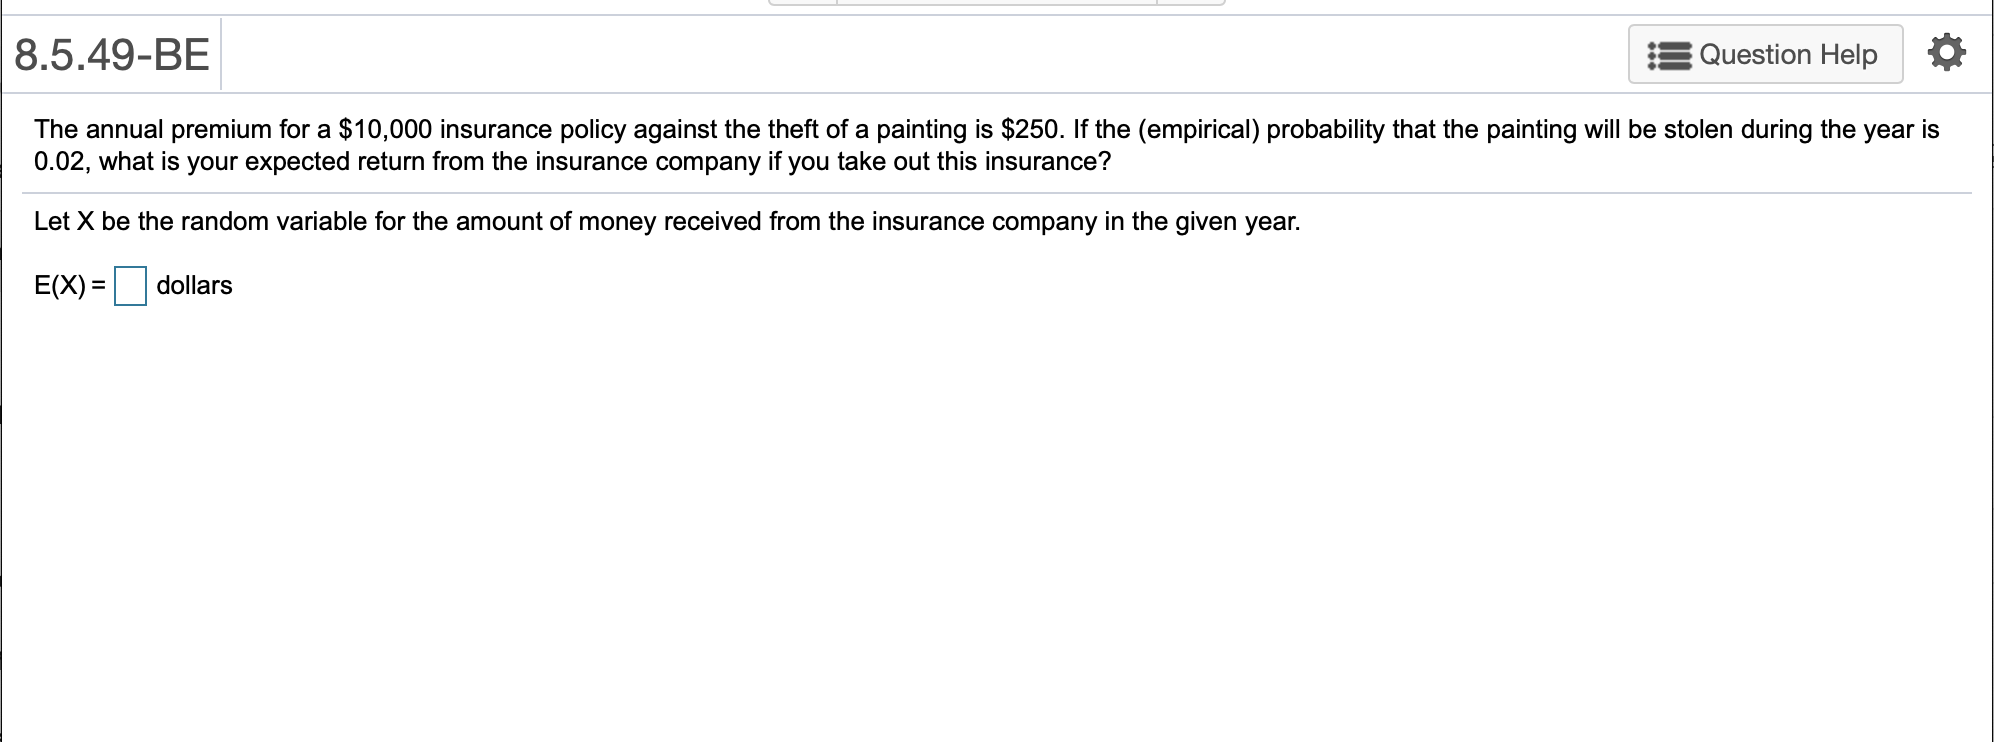 8.5.49-BE
Question Help
The annual premium for a $10,000 insurance policy against the theft of a painting is $250. If the (empirical) probability that the painting will be stolen during the year is
0.02, what is your expected return from the insurance company if you take out this insurance?
Let X be the random variable for the amount of money received from the insurance company in the given year.
E(X)
dollars
